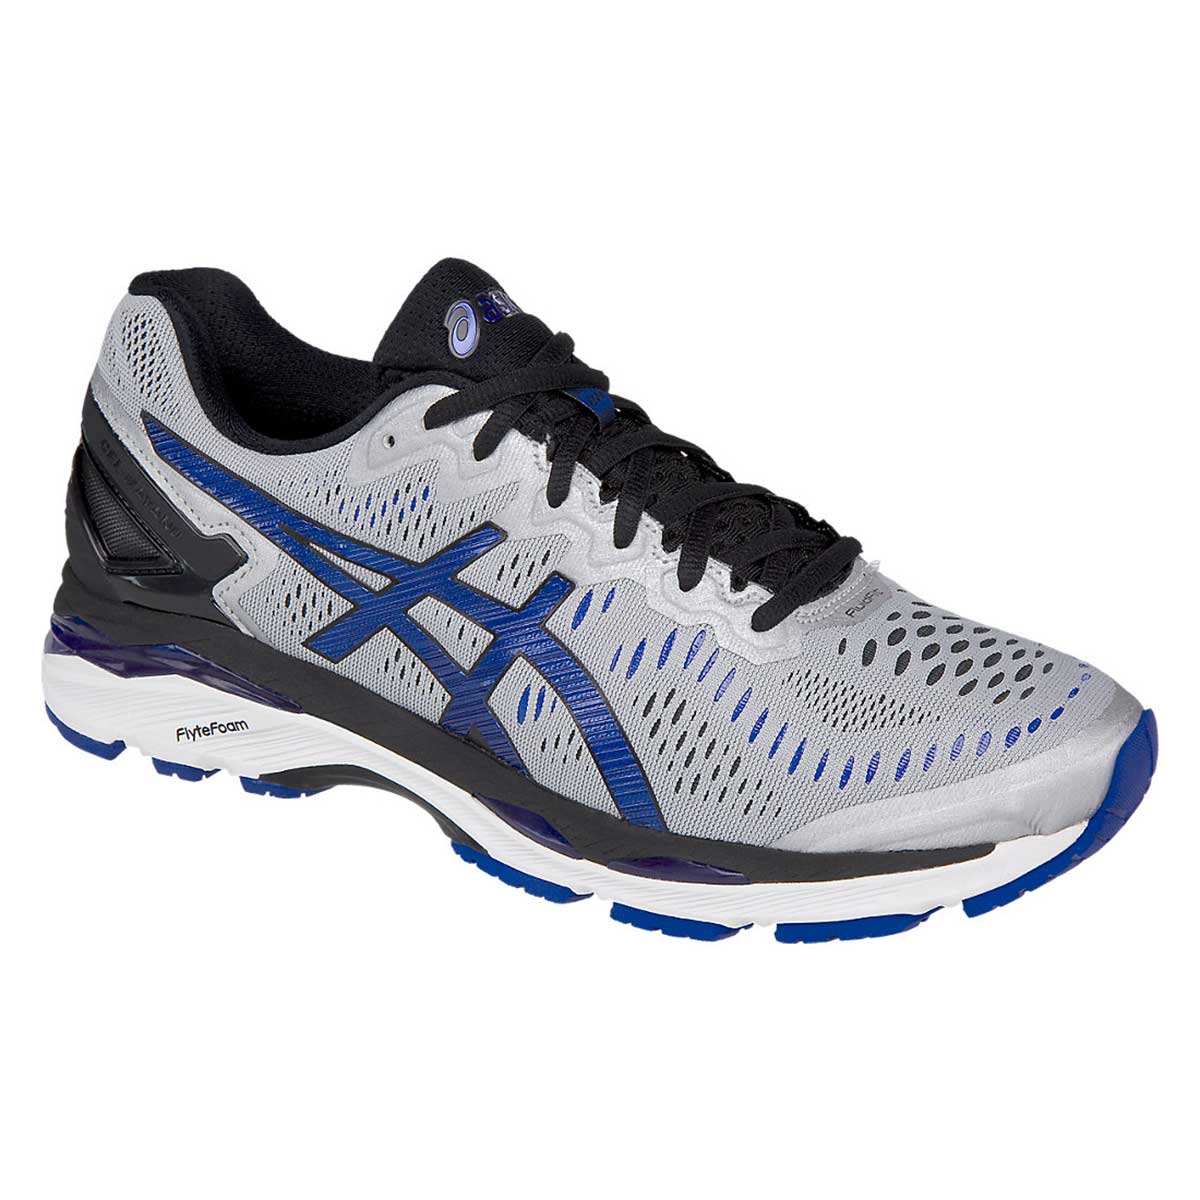 Buy Asics Gel-Kayano 23 (2E) Running Shoes (Silver/Imperial) Online